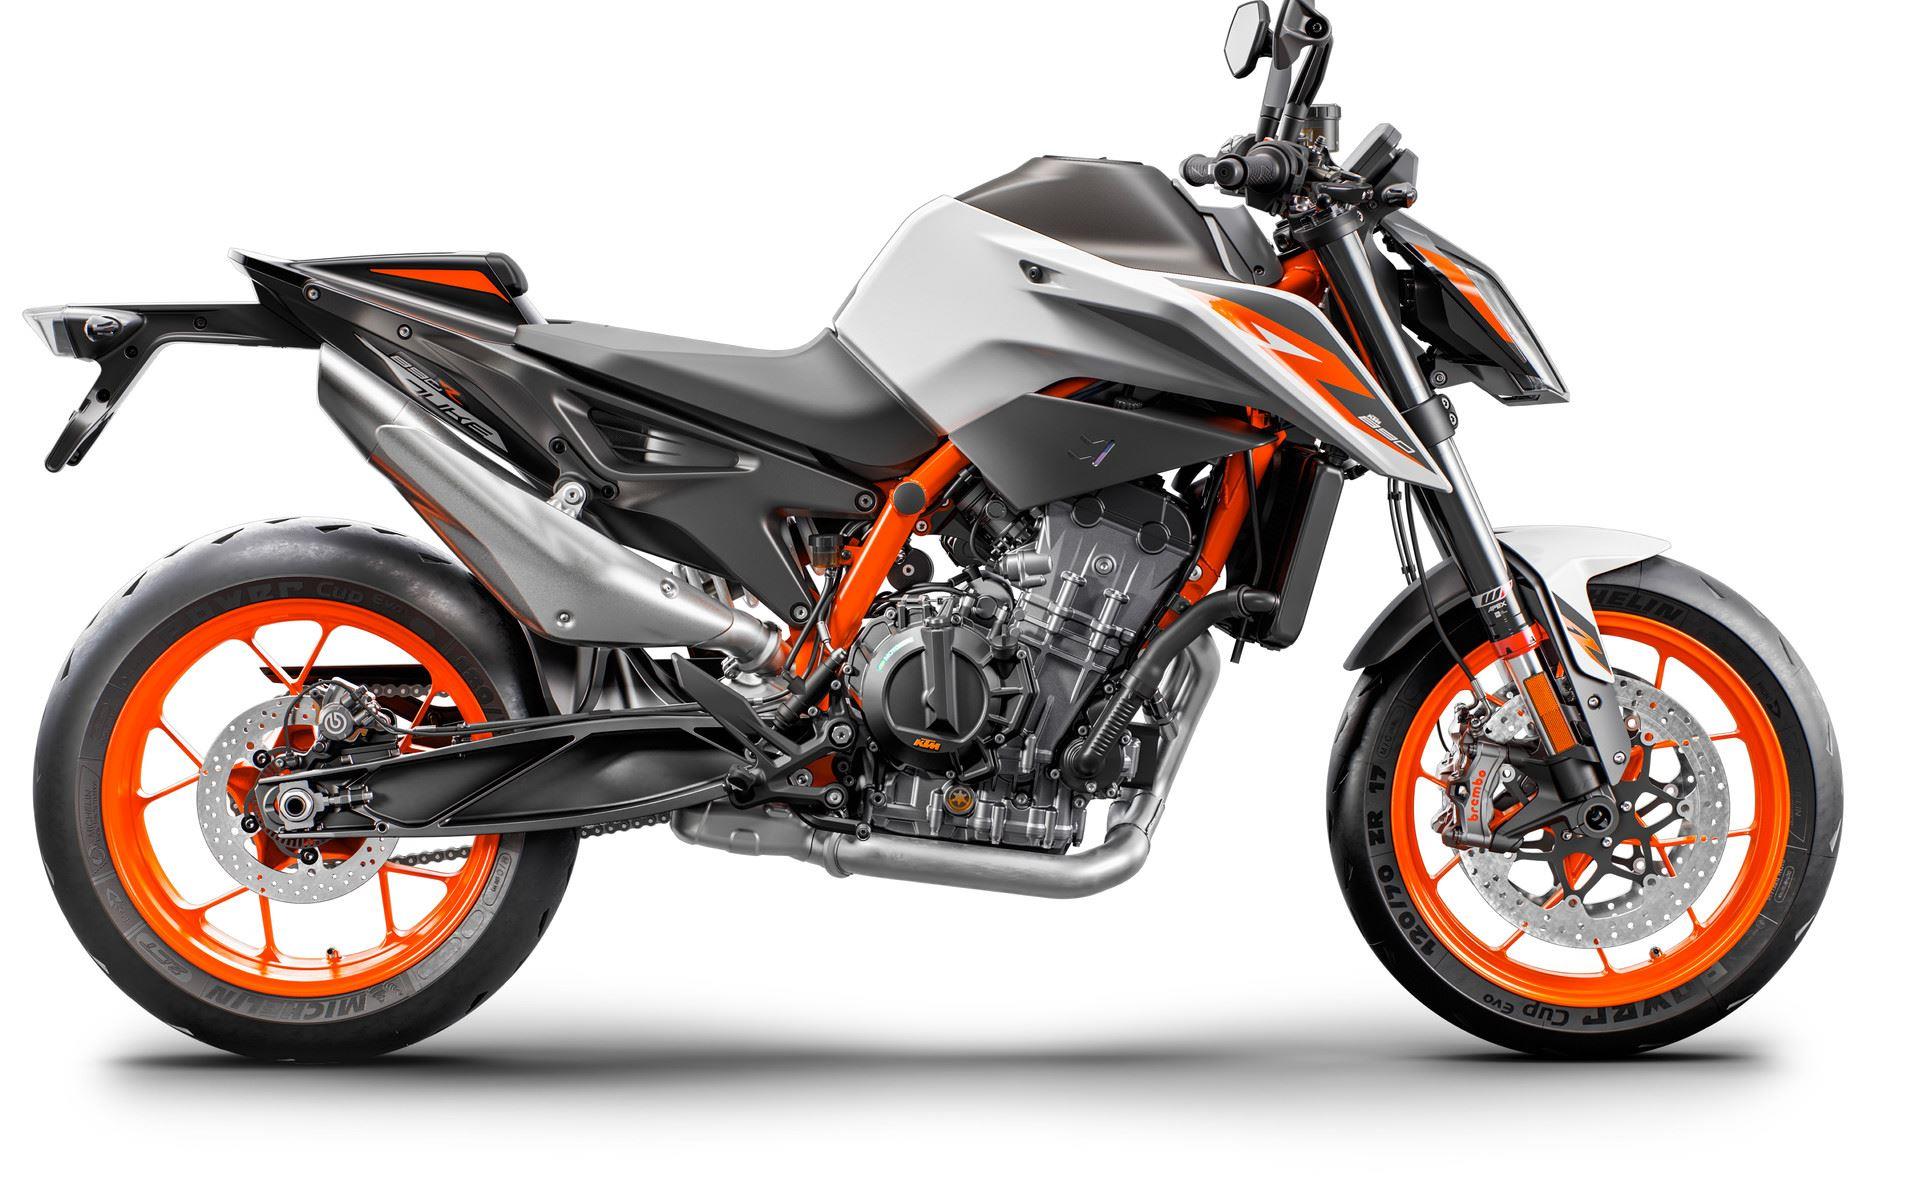 KTM Duke 890 R Specifications and Expected Price in India